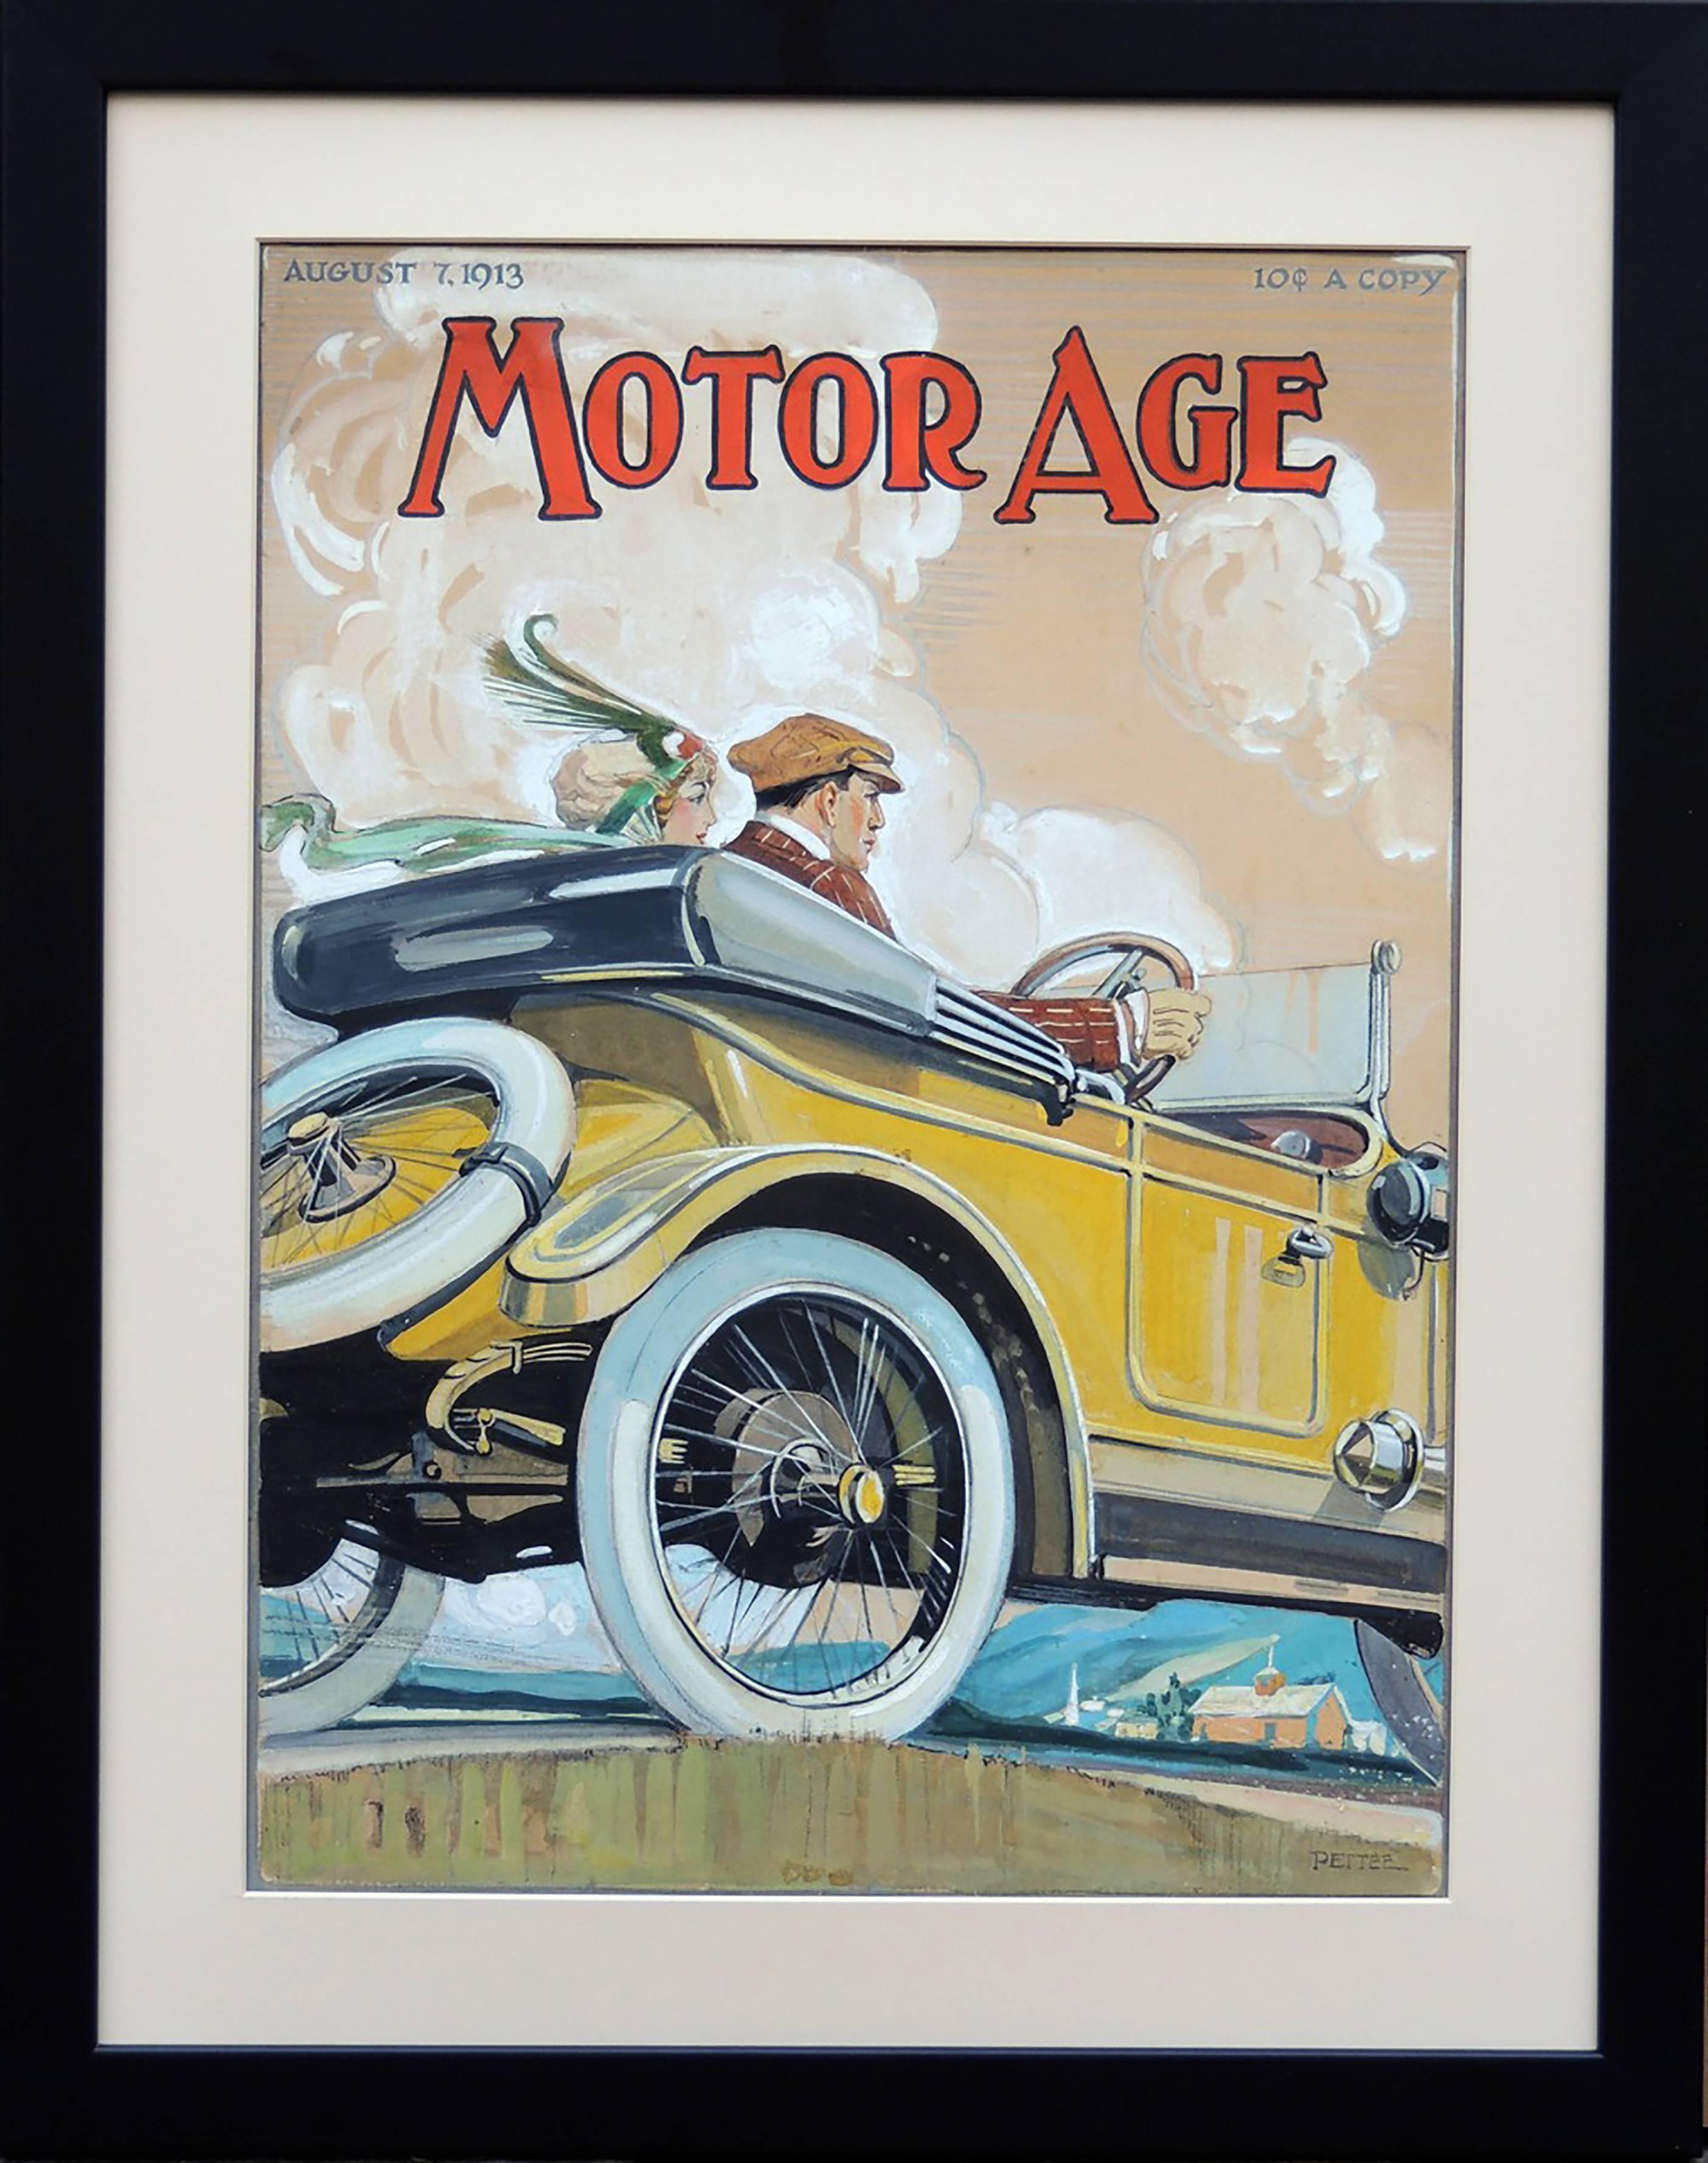 Original 1913 Motor Age Magazine Cover Art Illustration - Painting by Clinton Pettee